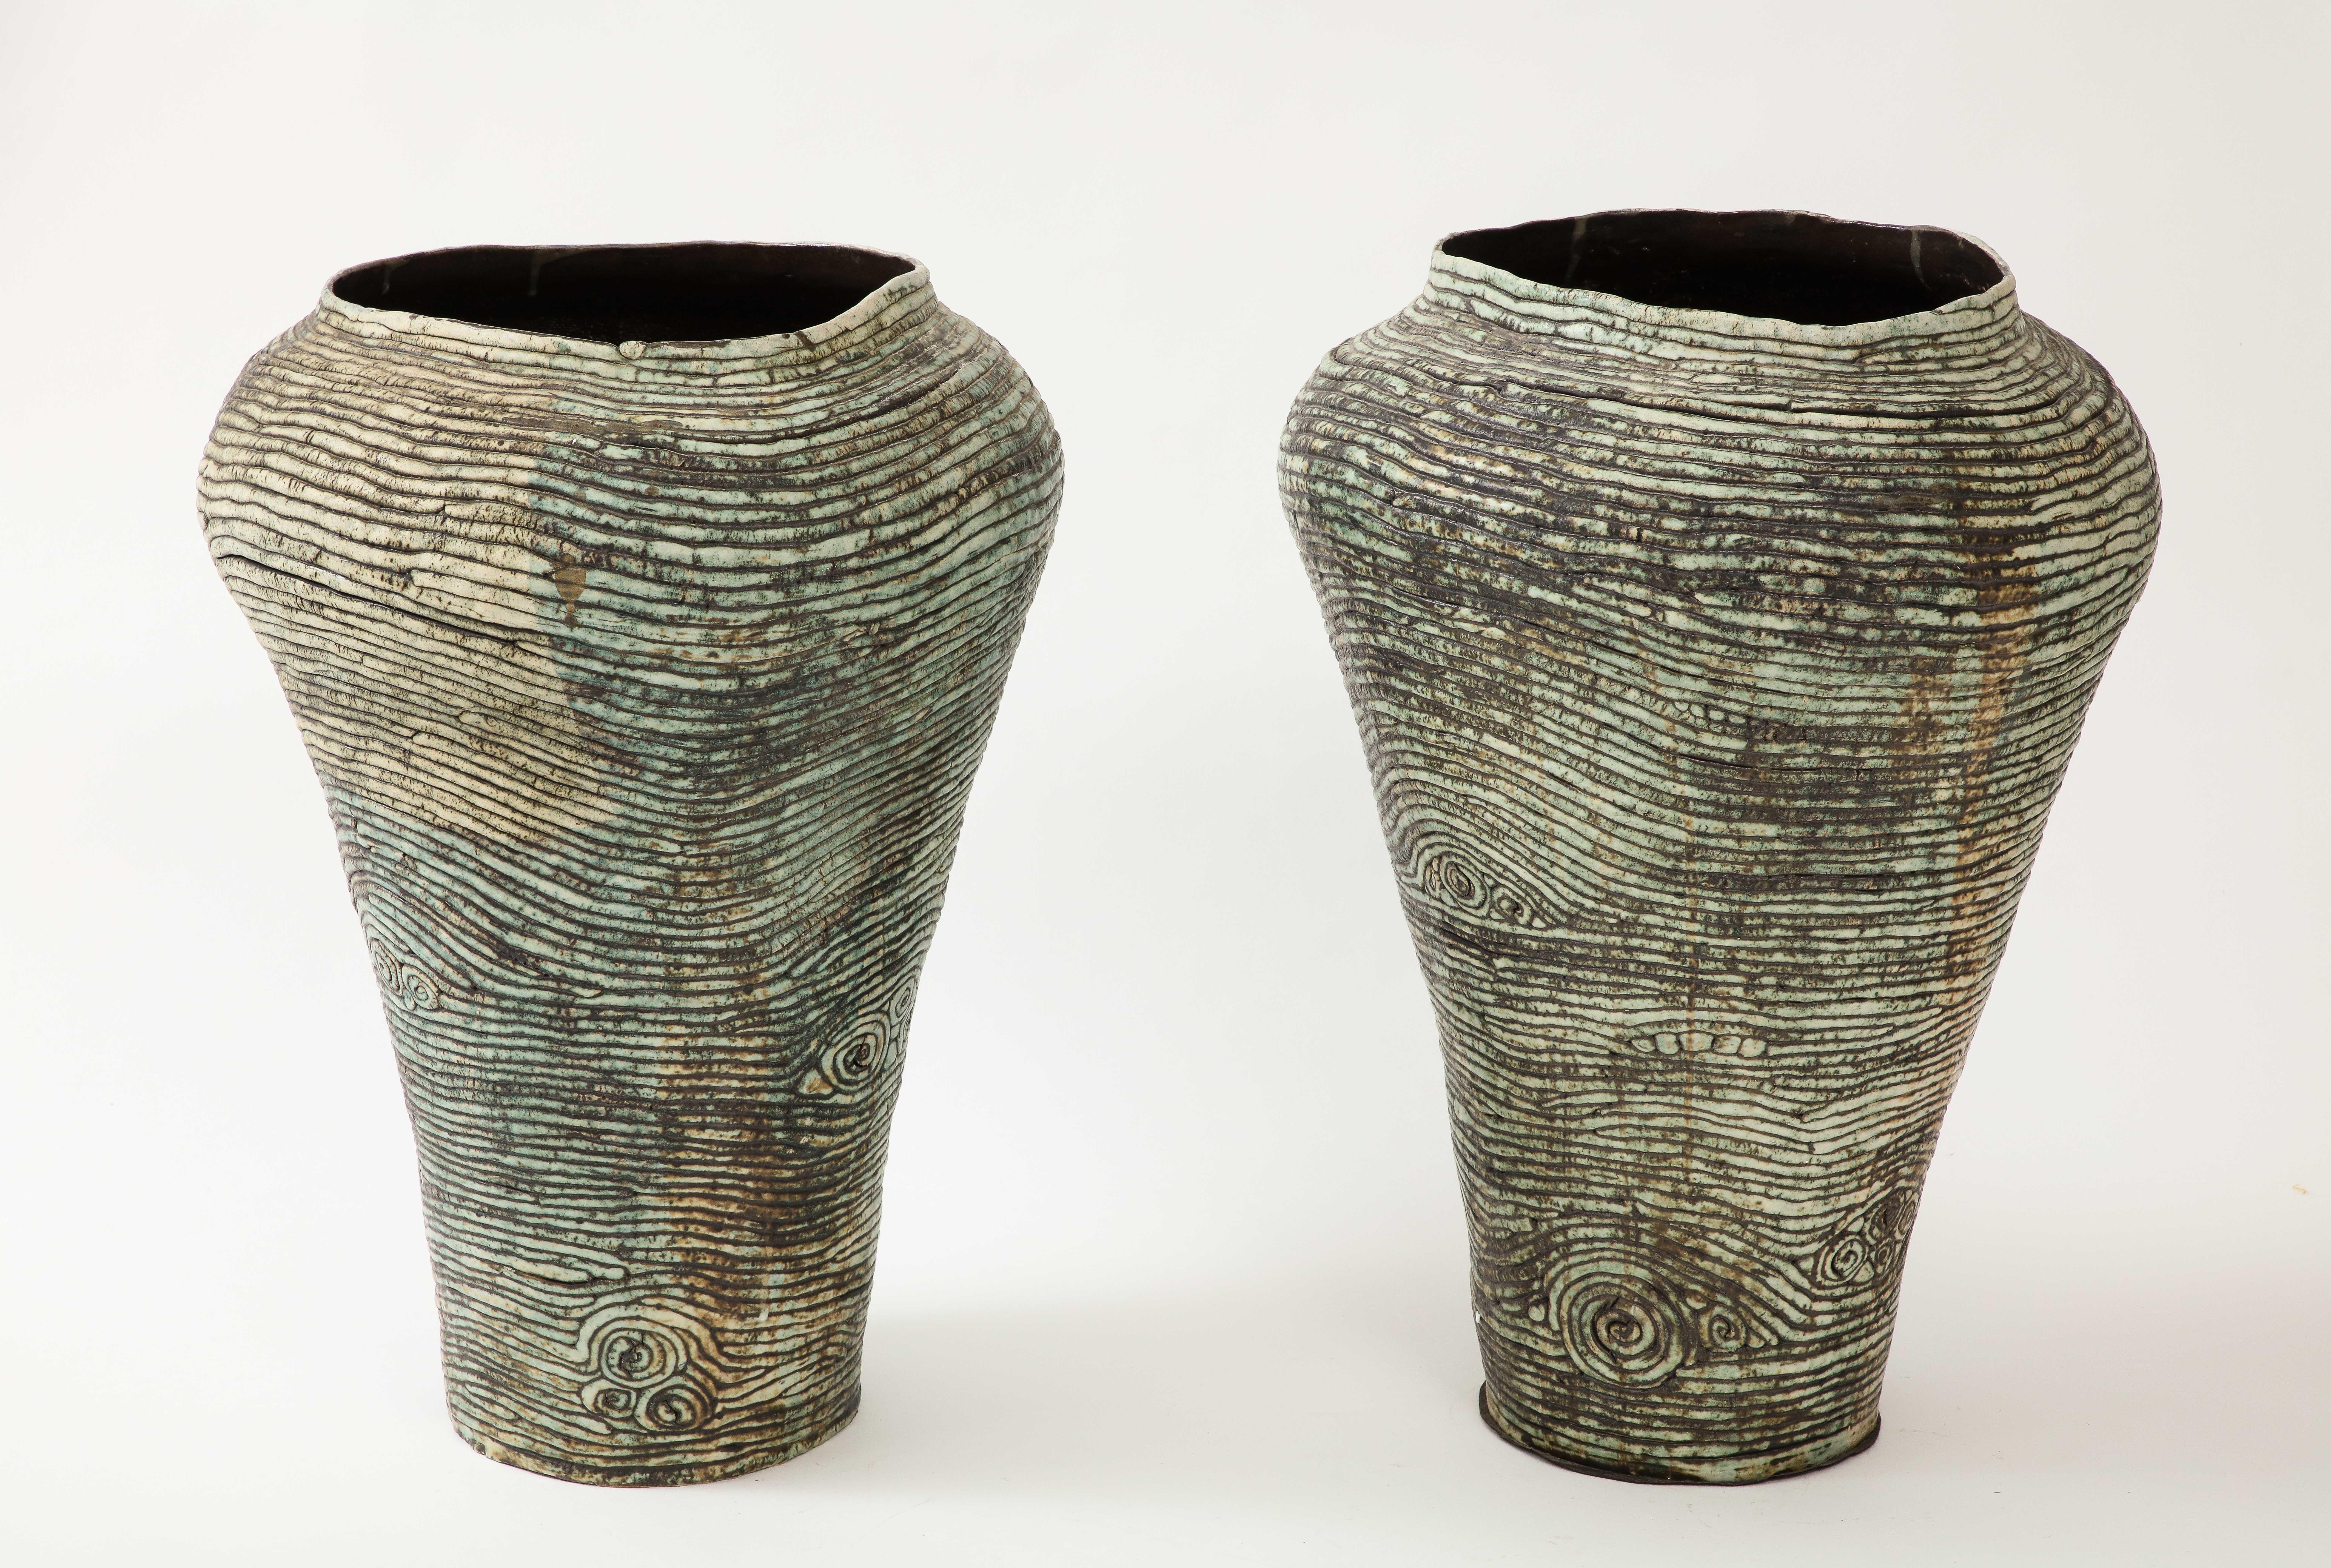 Pair of large scale hand built ceramic pottery vessels featuring bone white and green matte glazes.